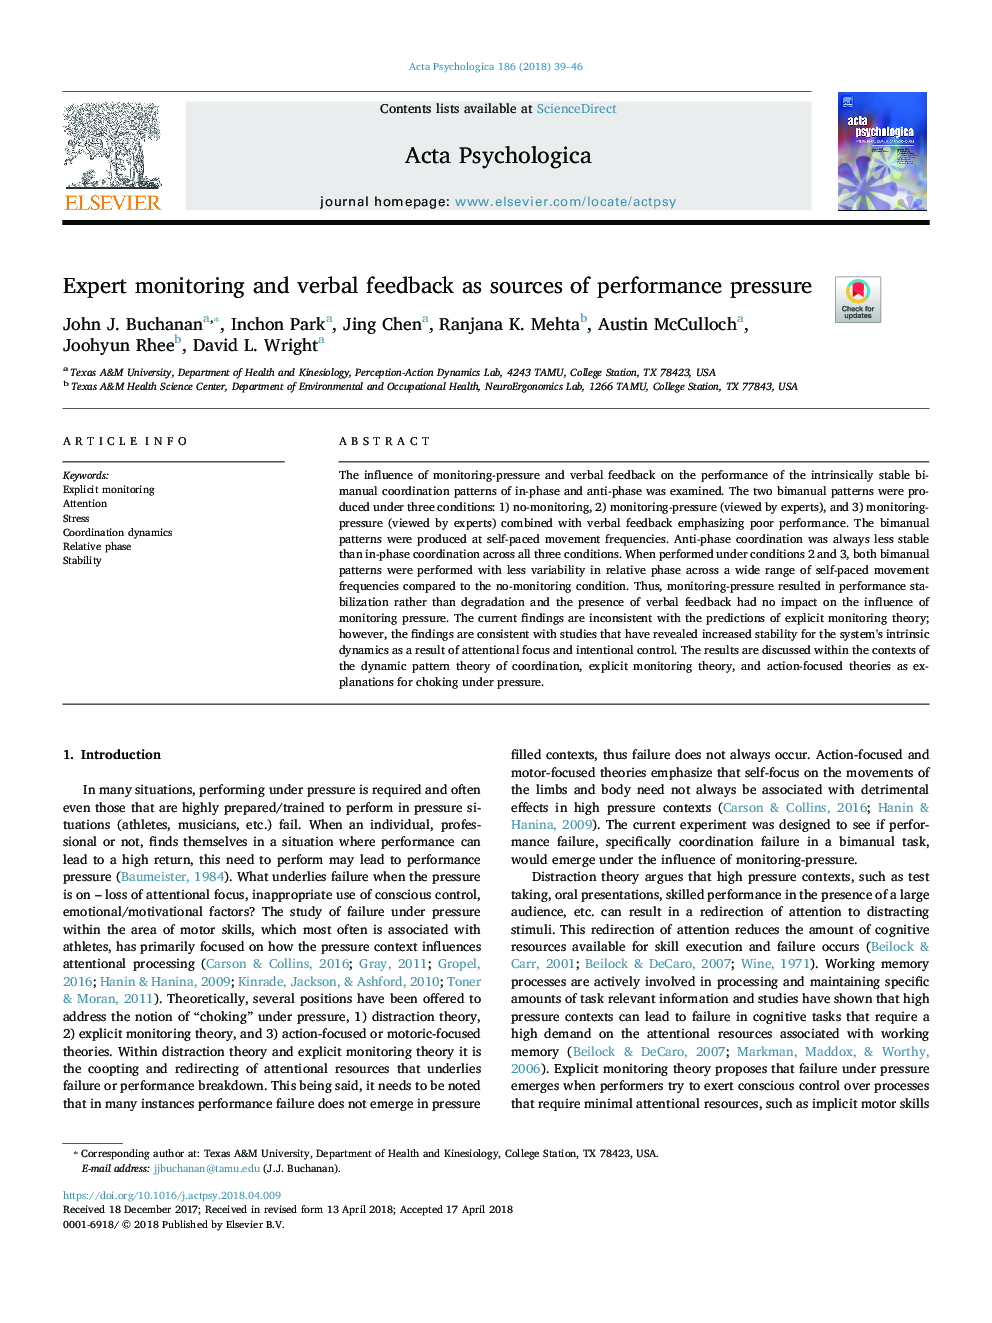 Expert monitoring and verbal feedback as sources of performance pressure